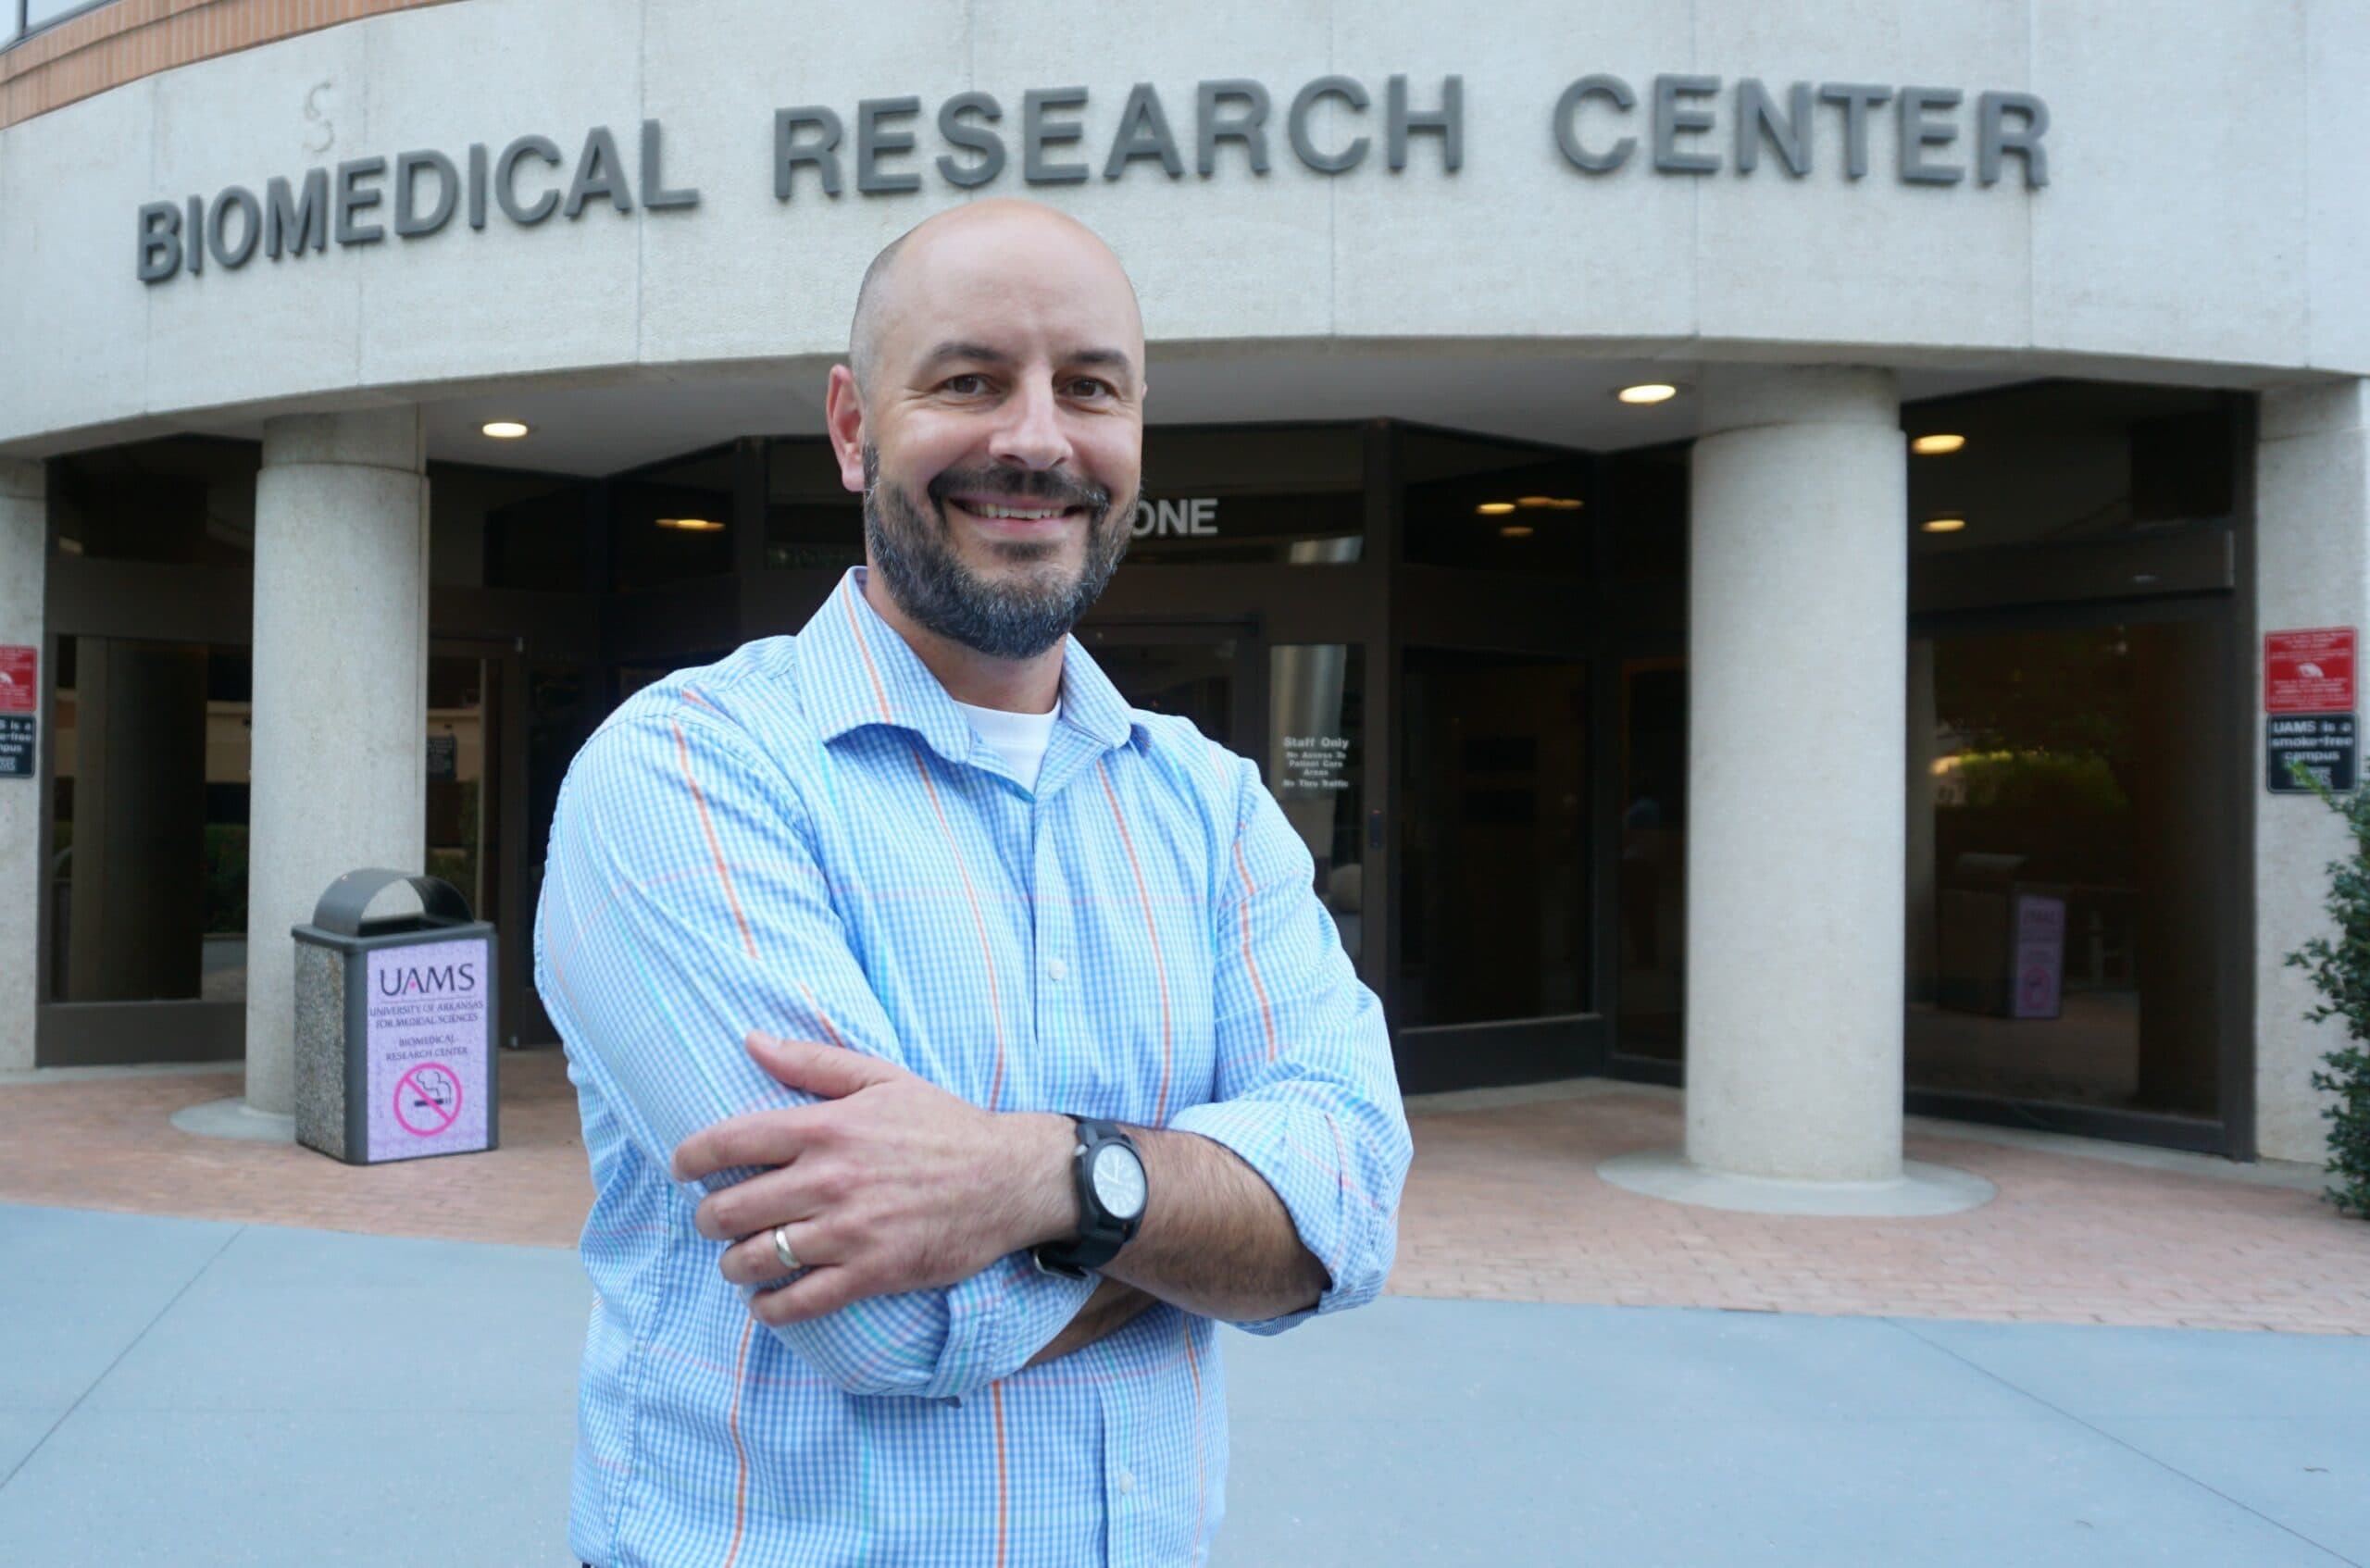 Daniel Voth UAMS, Ph.D., led an NIH grant supporting renovations to enhance the infectious disease research space in the building behind him.